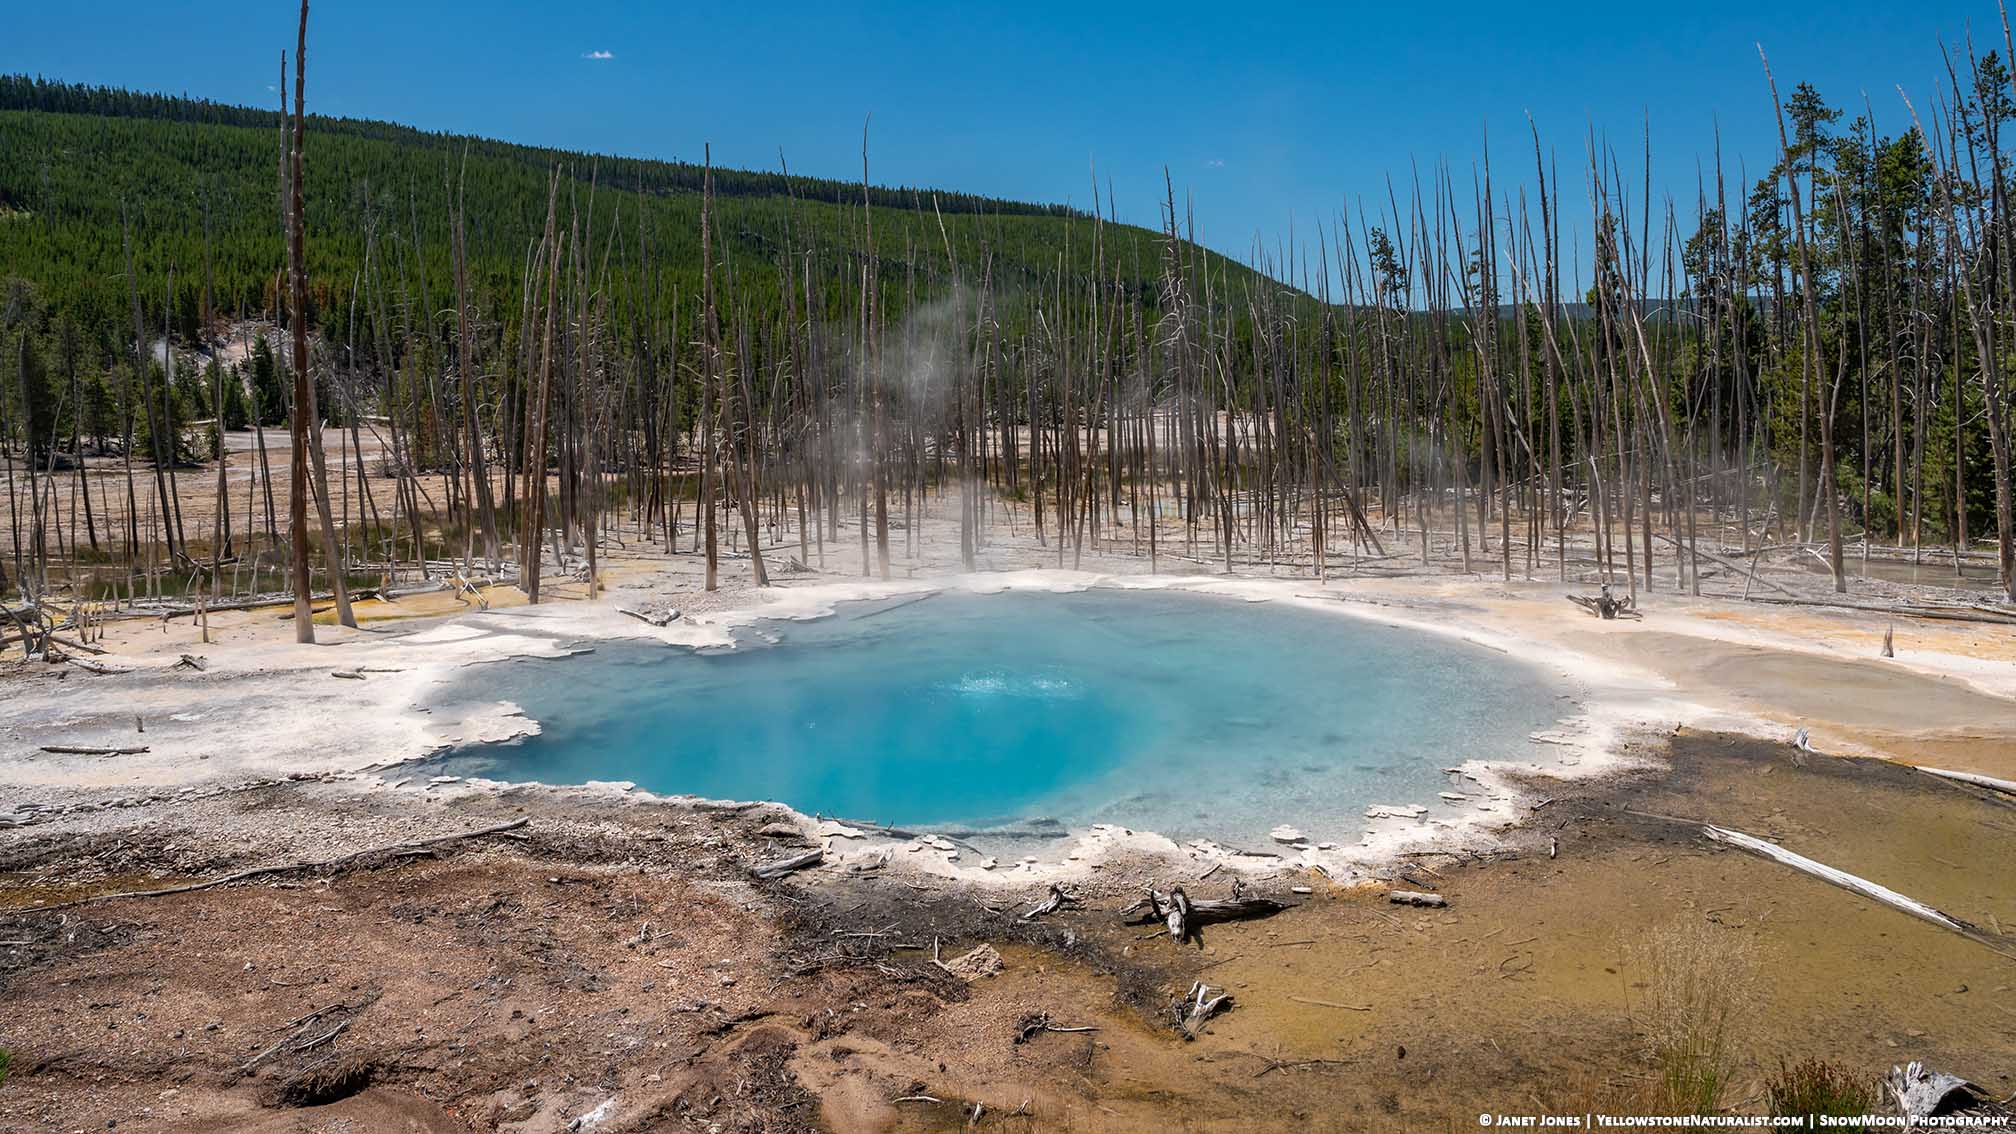 Cistern Pool starts to drop after an eruption of Steamboat in Yellowstone's Norris Geyser Basin